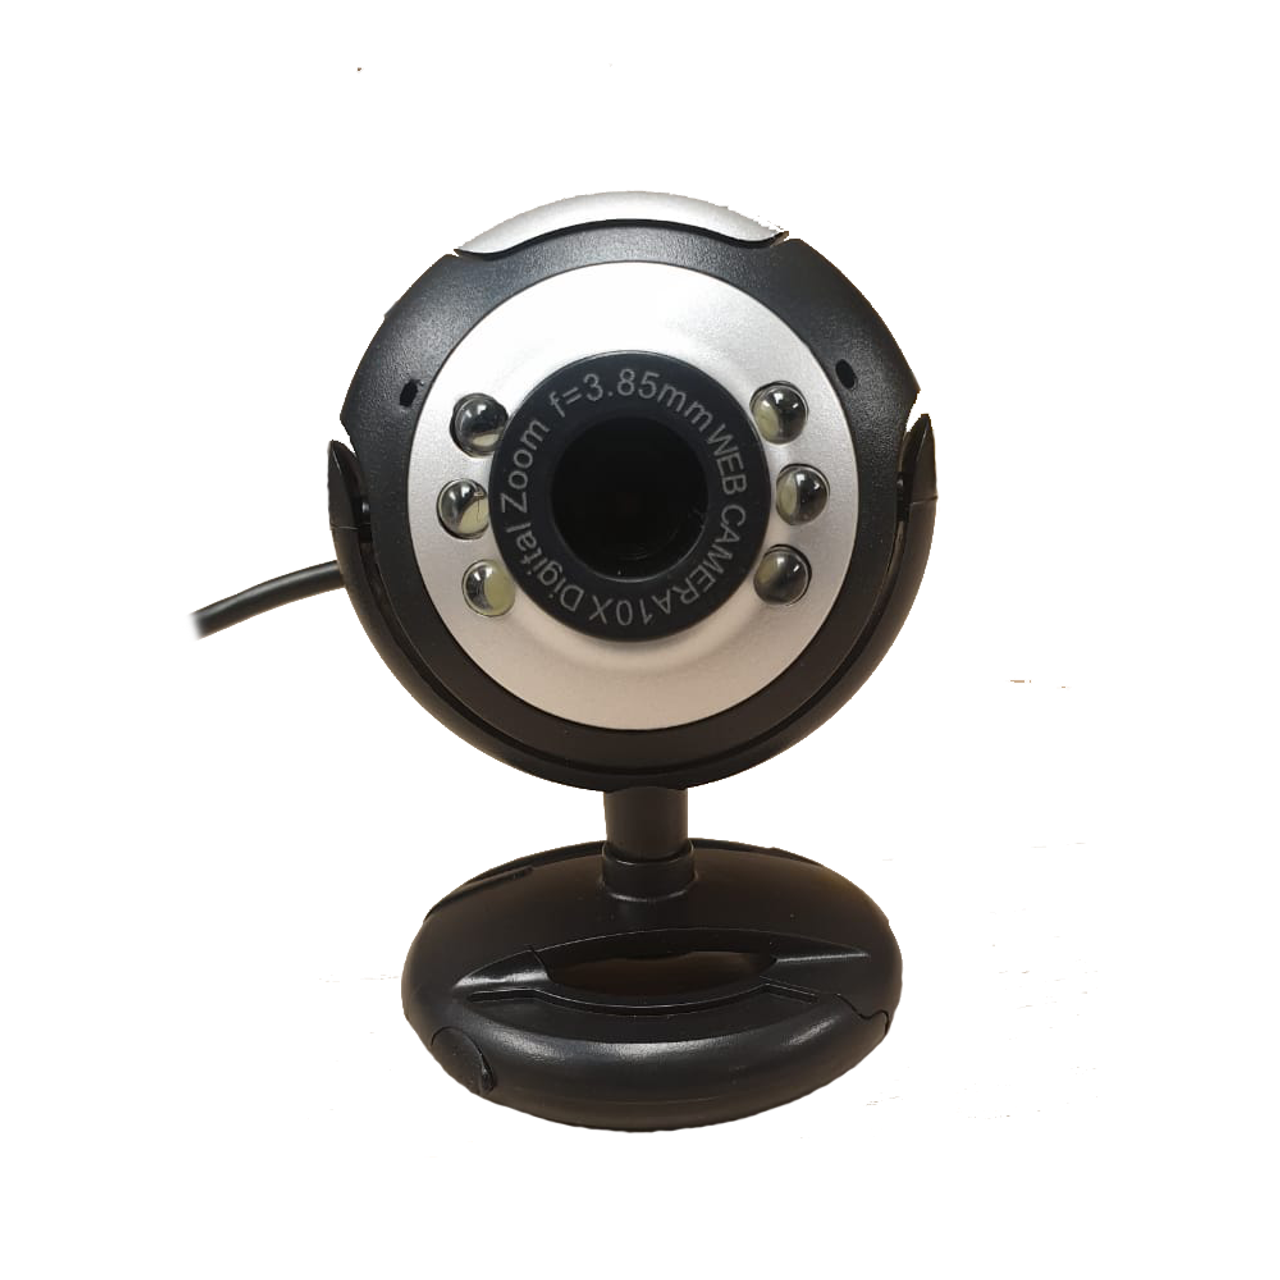 PC CAMERA W950 - WEBCAM For Computer, W950, AYOUB COMPUTERS